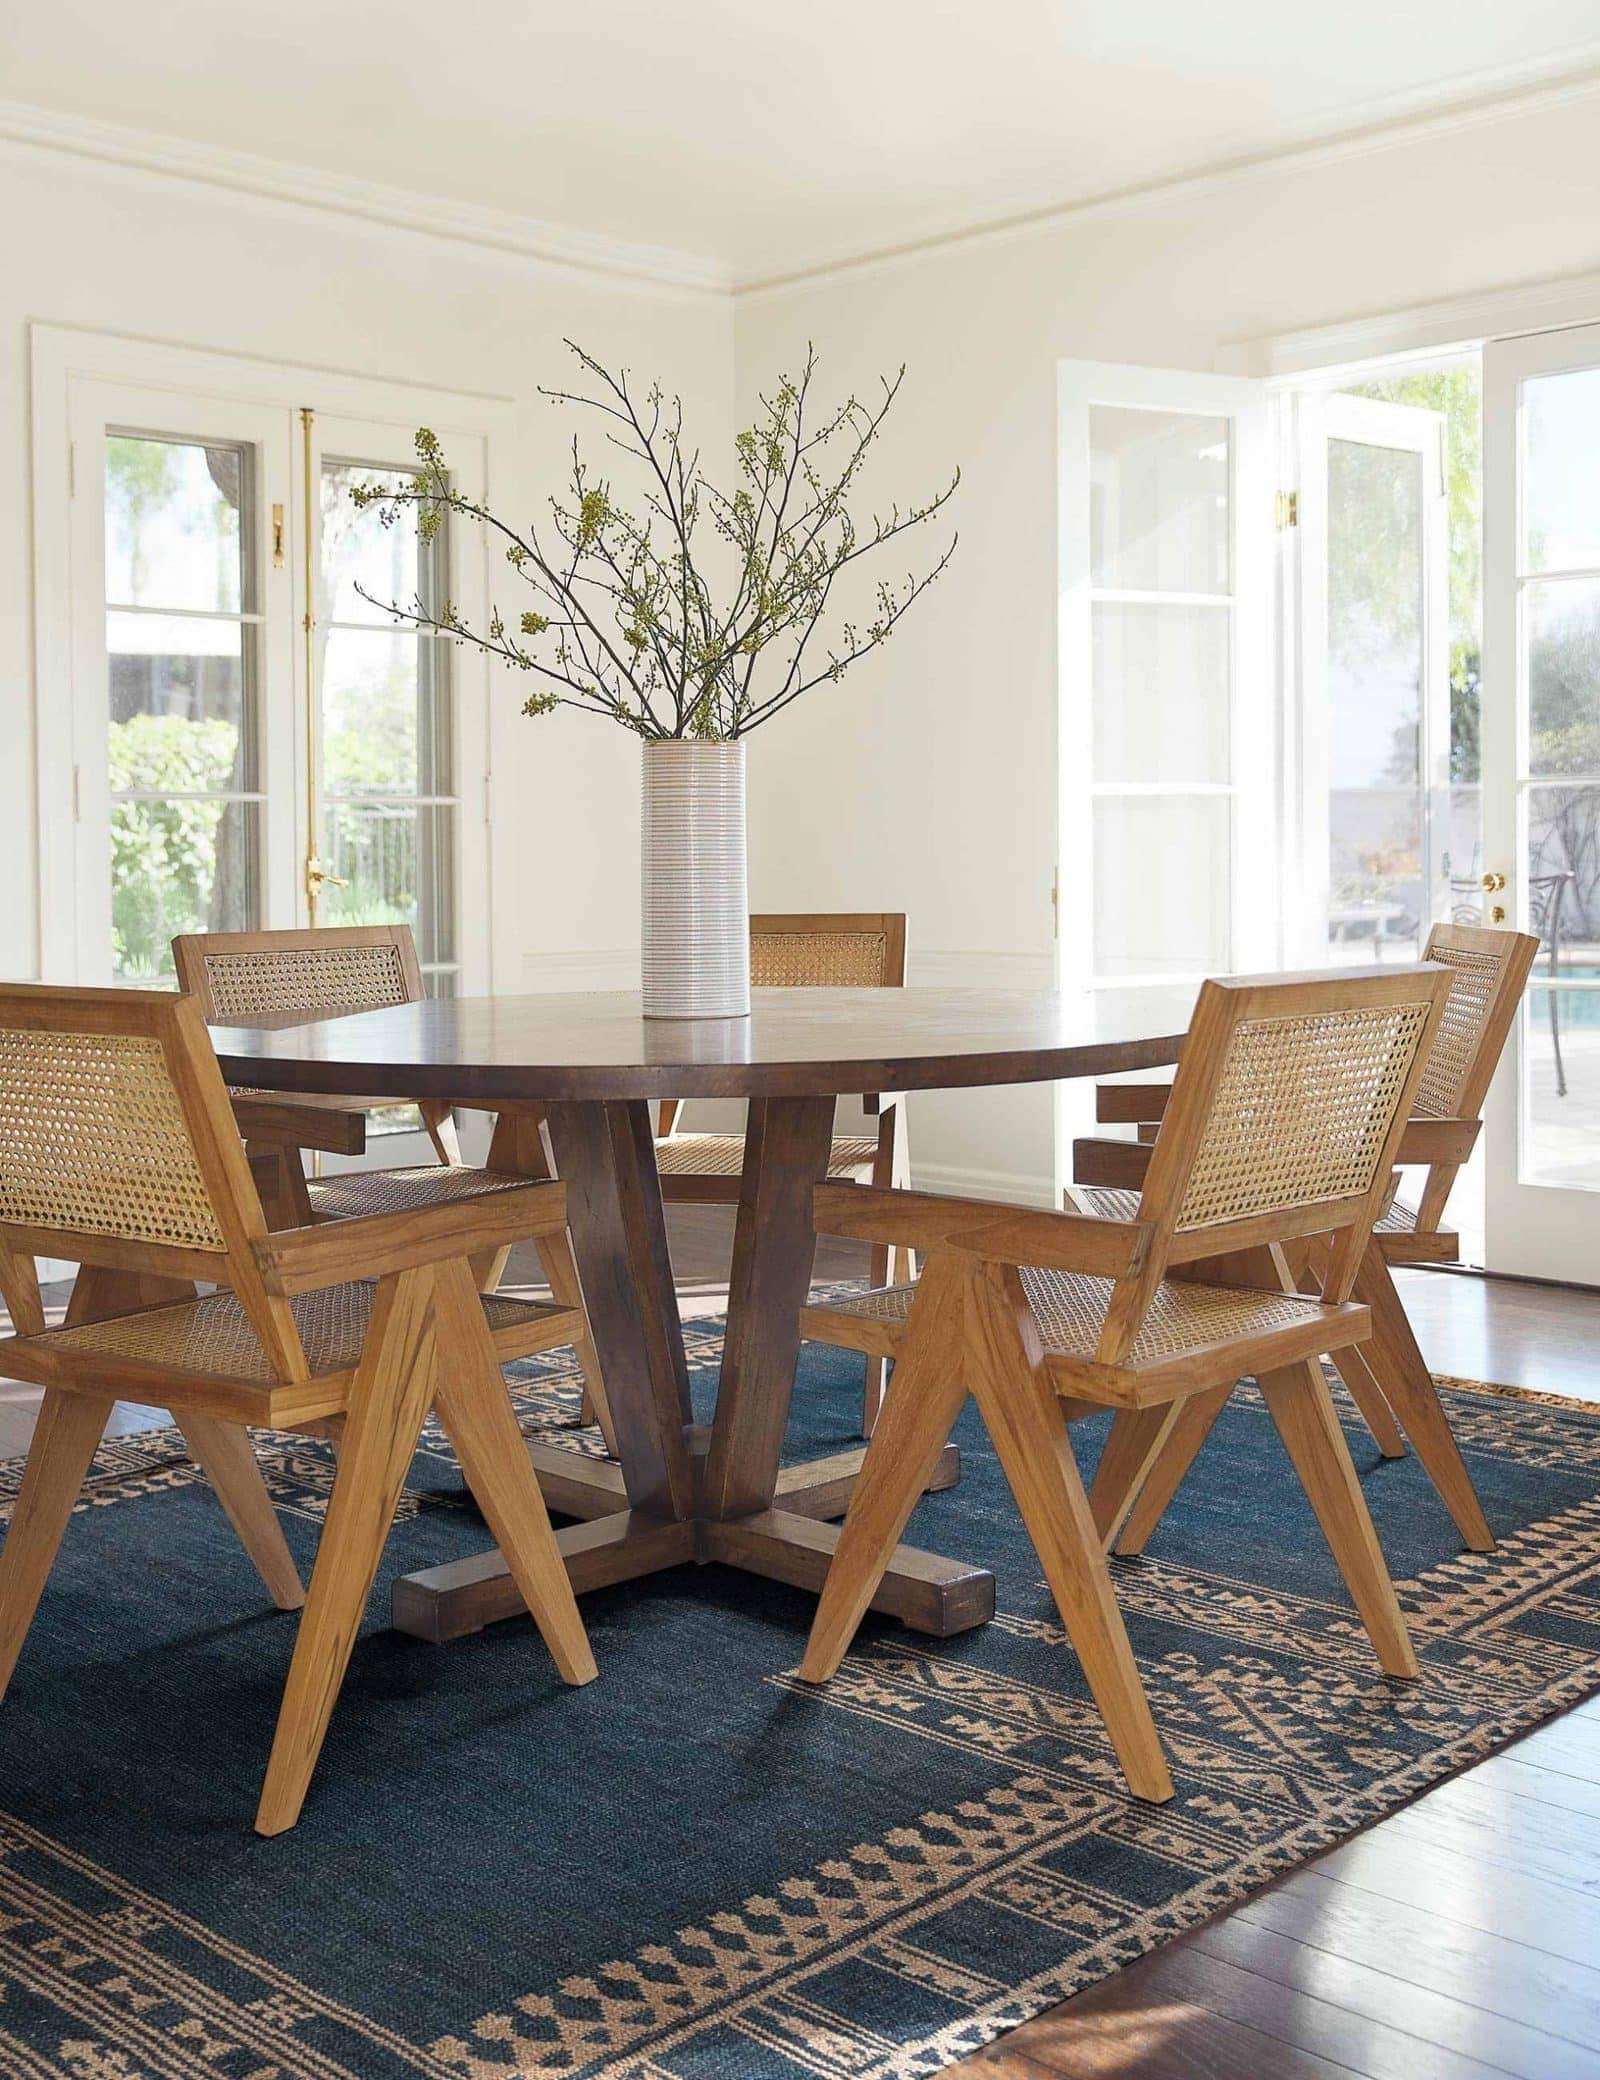 Mix Wood and White for Your Dining Set